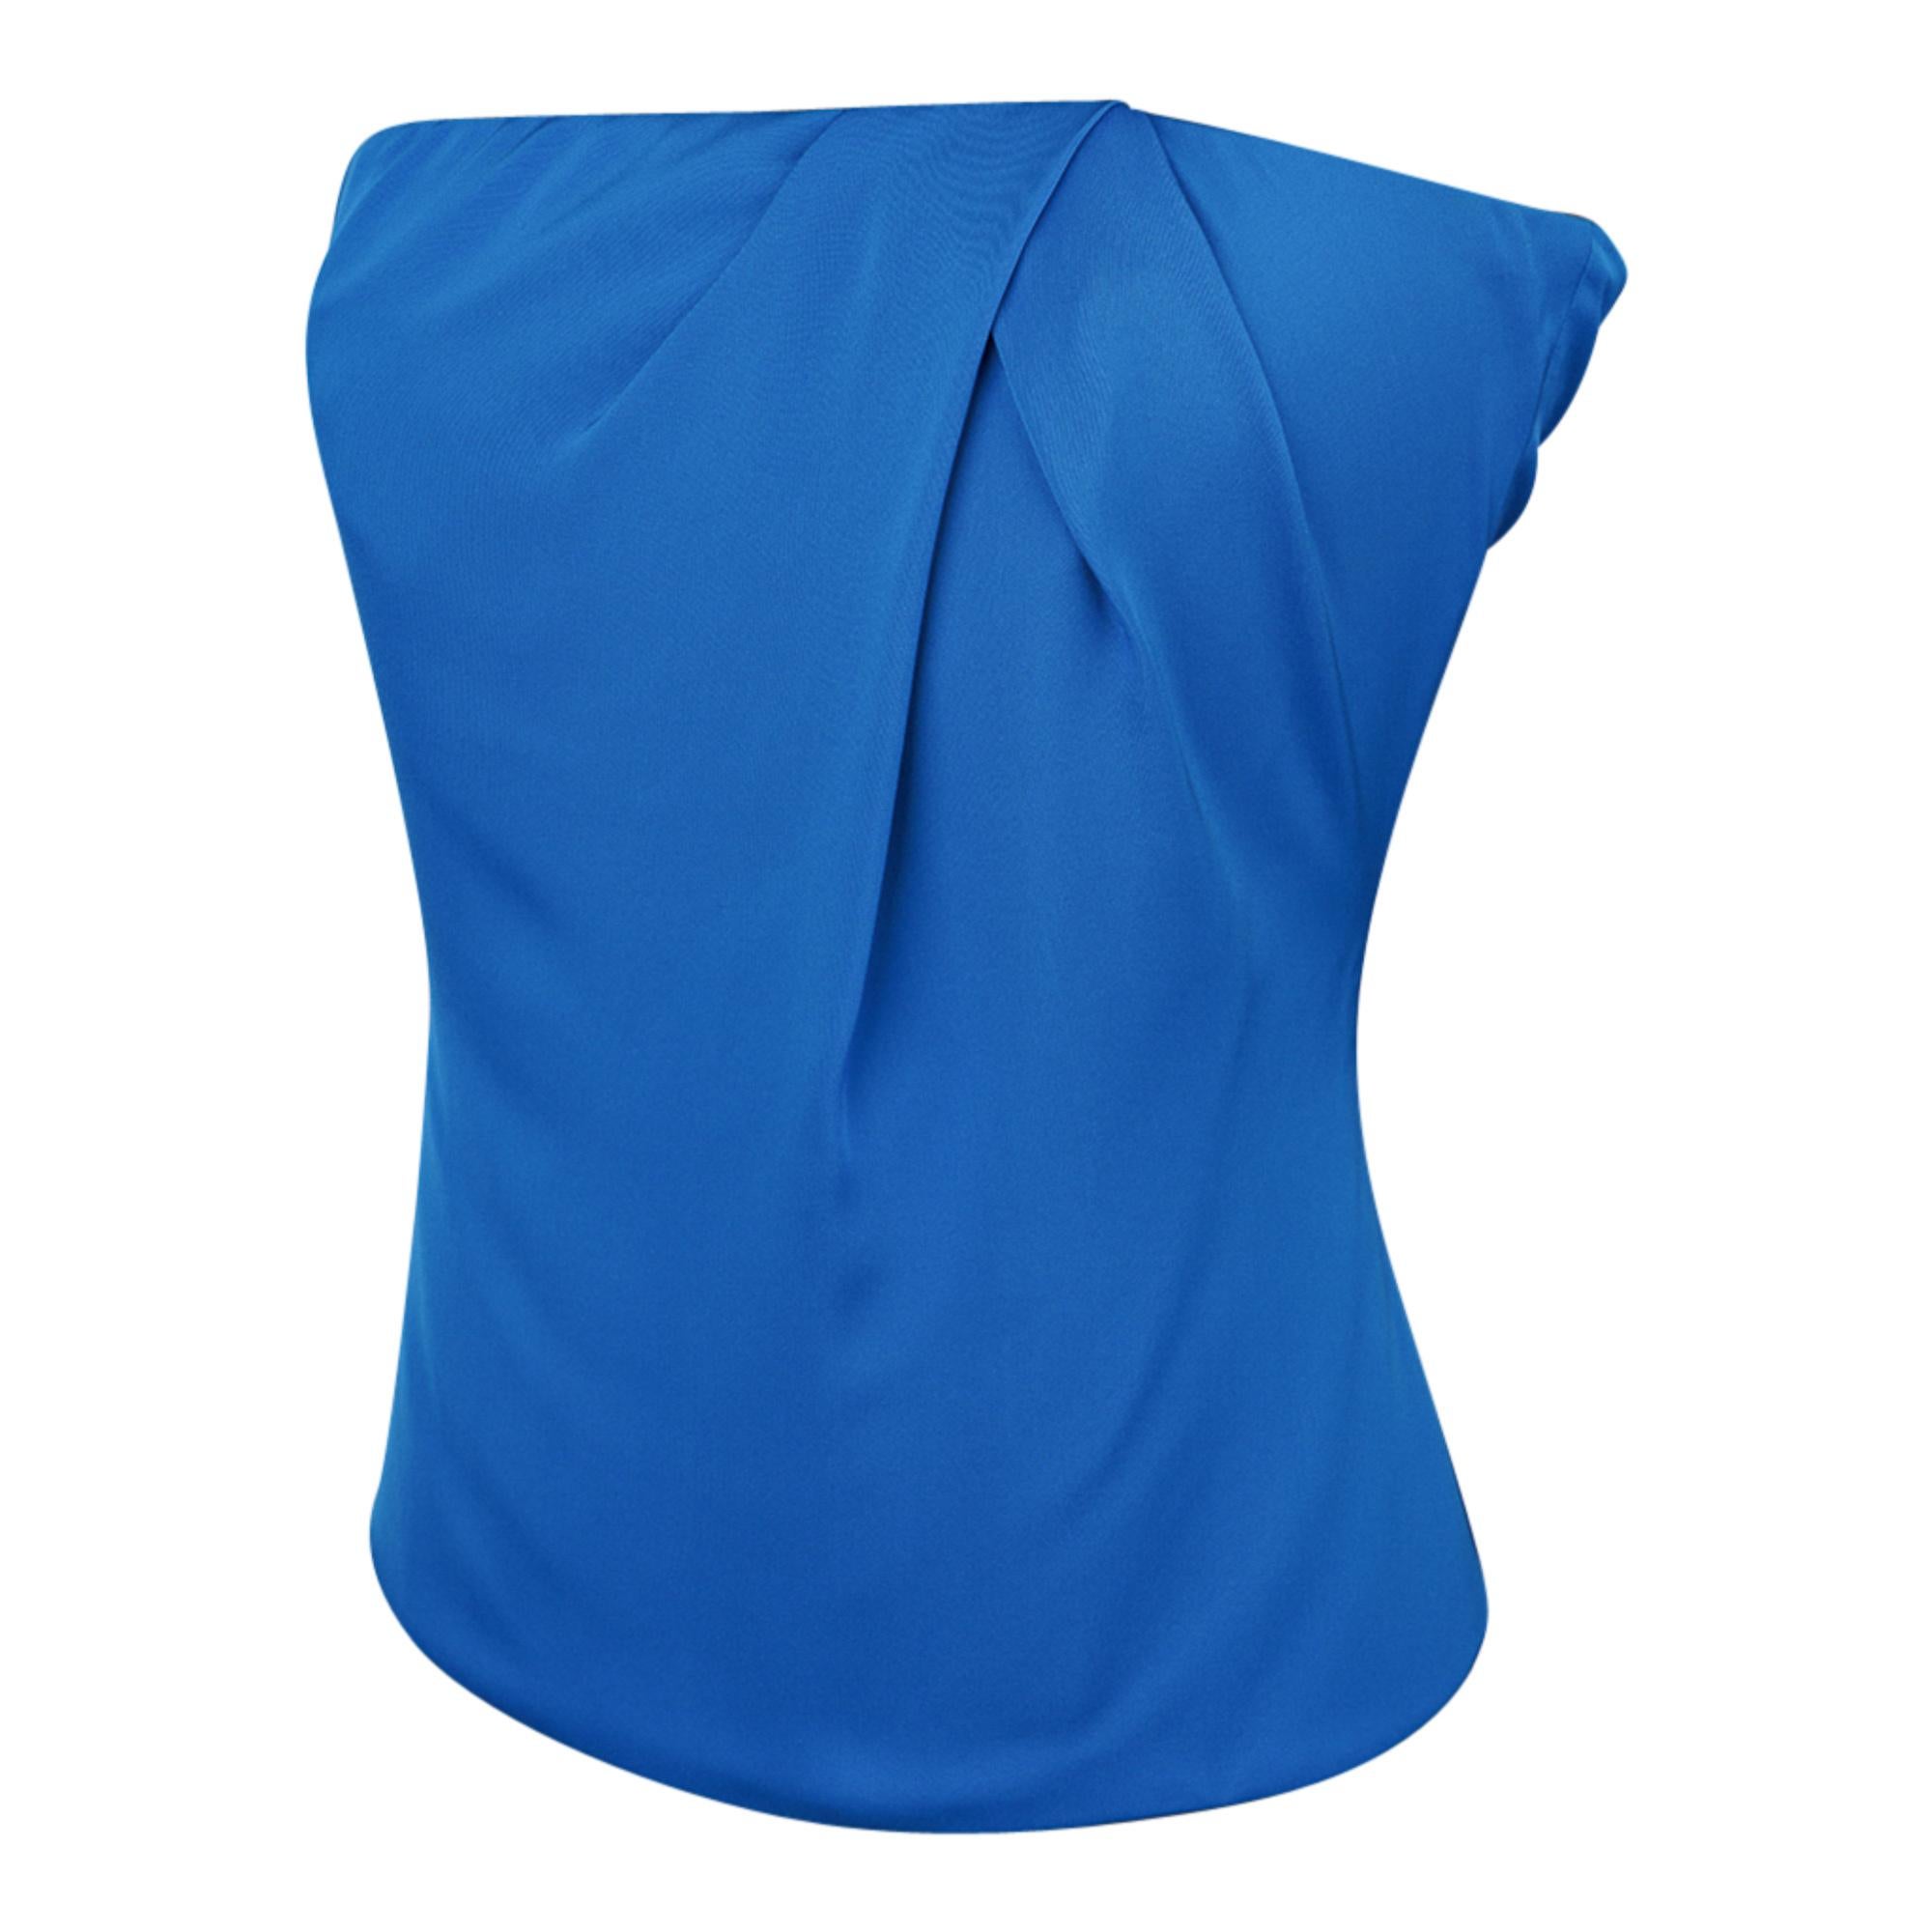 Mightychic offers a Gucci silk top in a fresh jewel tone blue silk.
Strapless with fabric detail at top has stays for fabulous fit.
Rear zipper pull.
NEW or NEVER WORN.   
final sale

SIZE 42
USA SIZE 6
(runs small)

TOP MEASURES:
LENGTH 